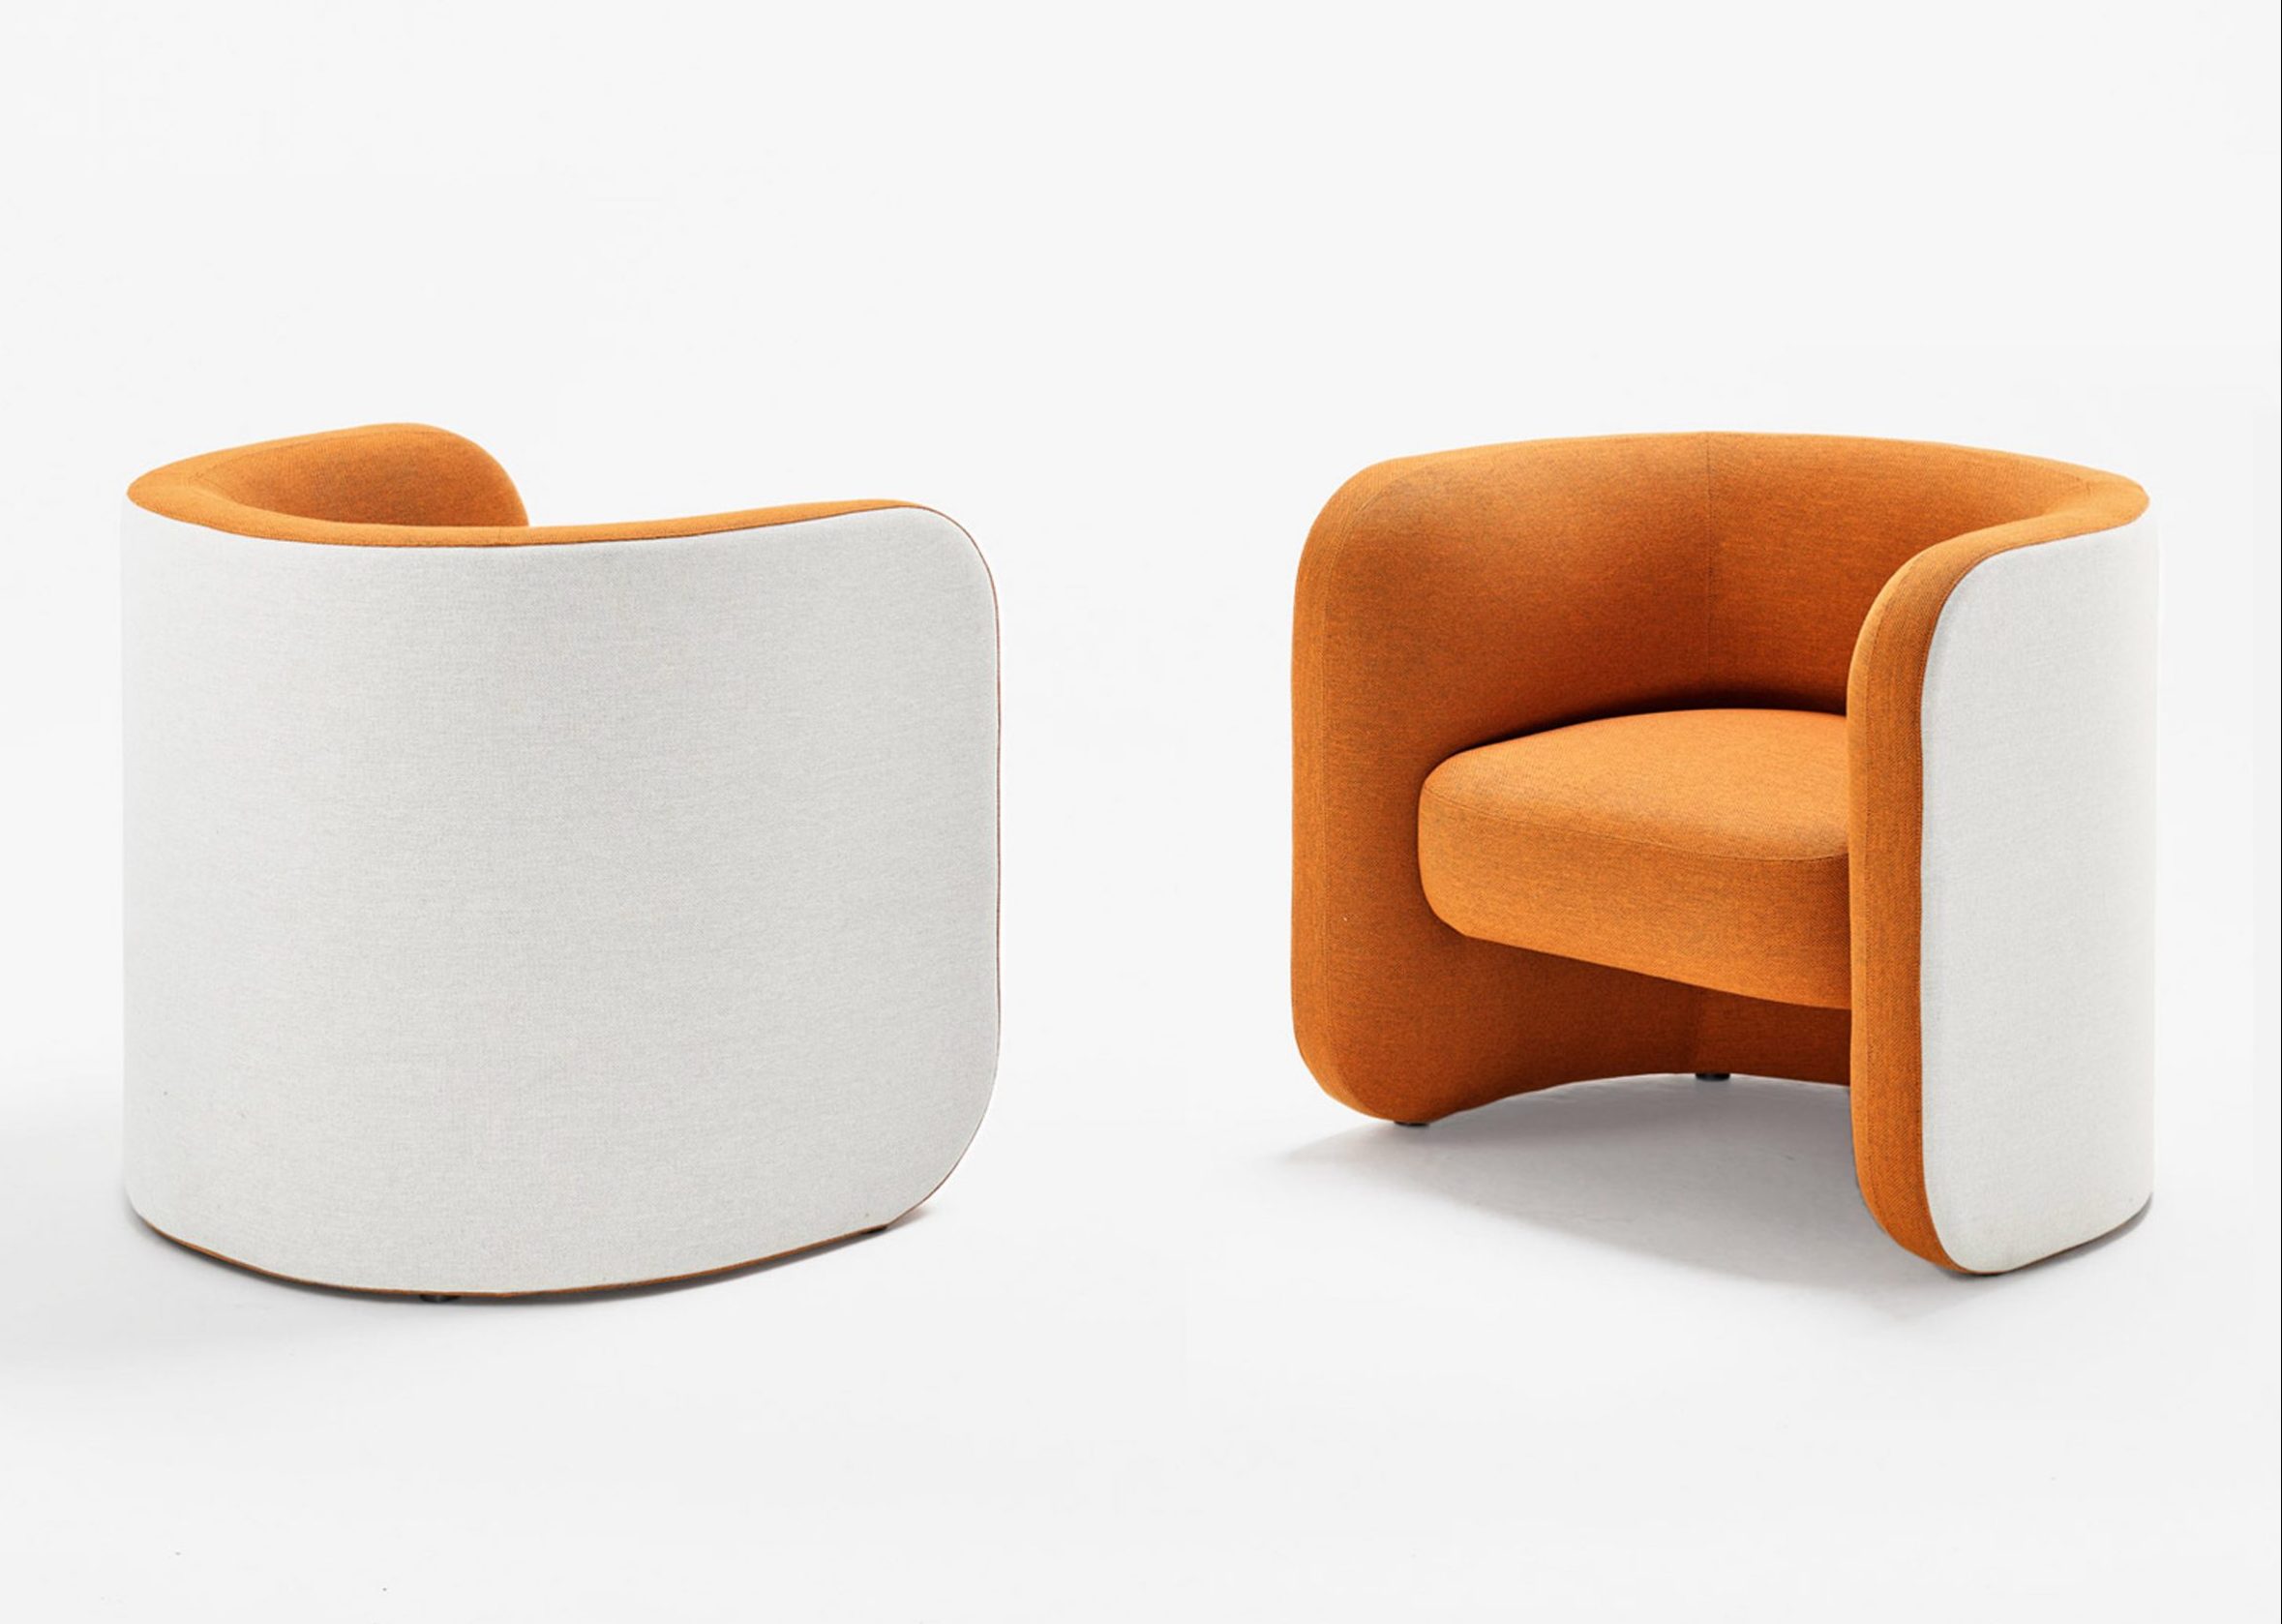 Two Biggie chairs by Derlot with white and orange upholstery